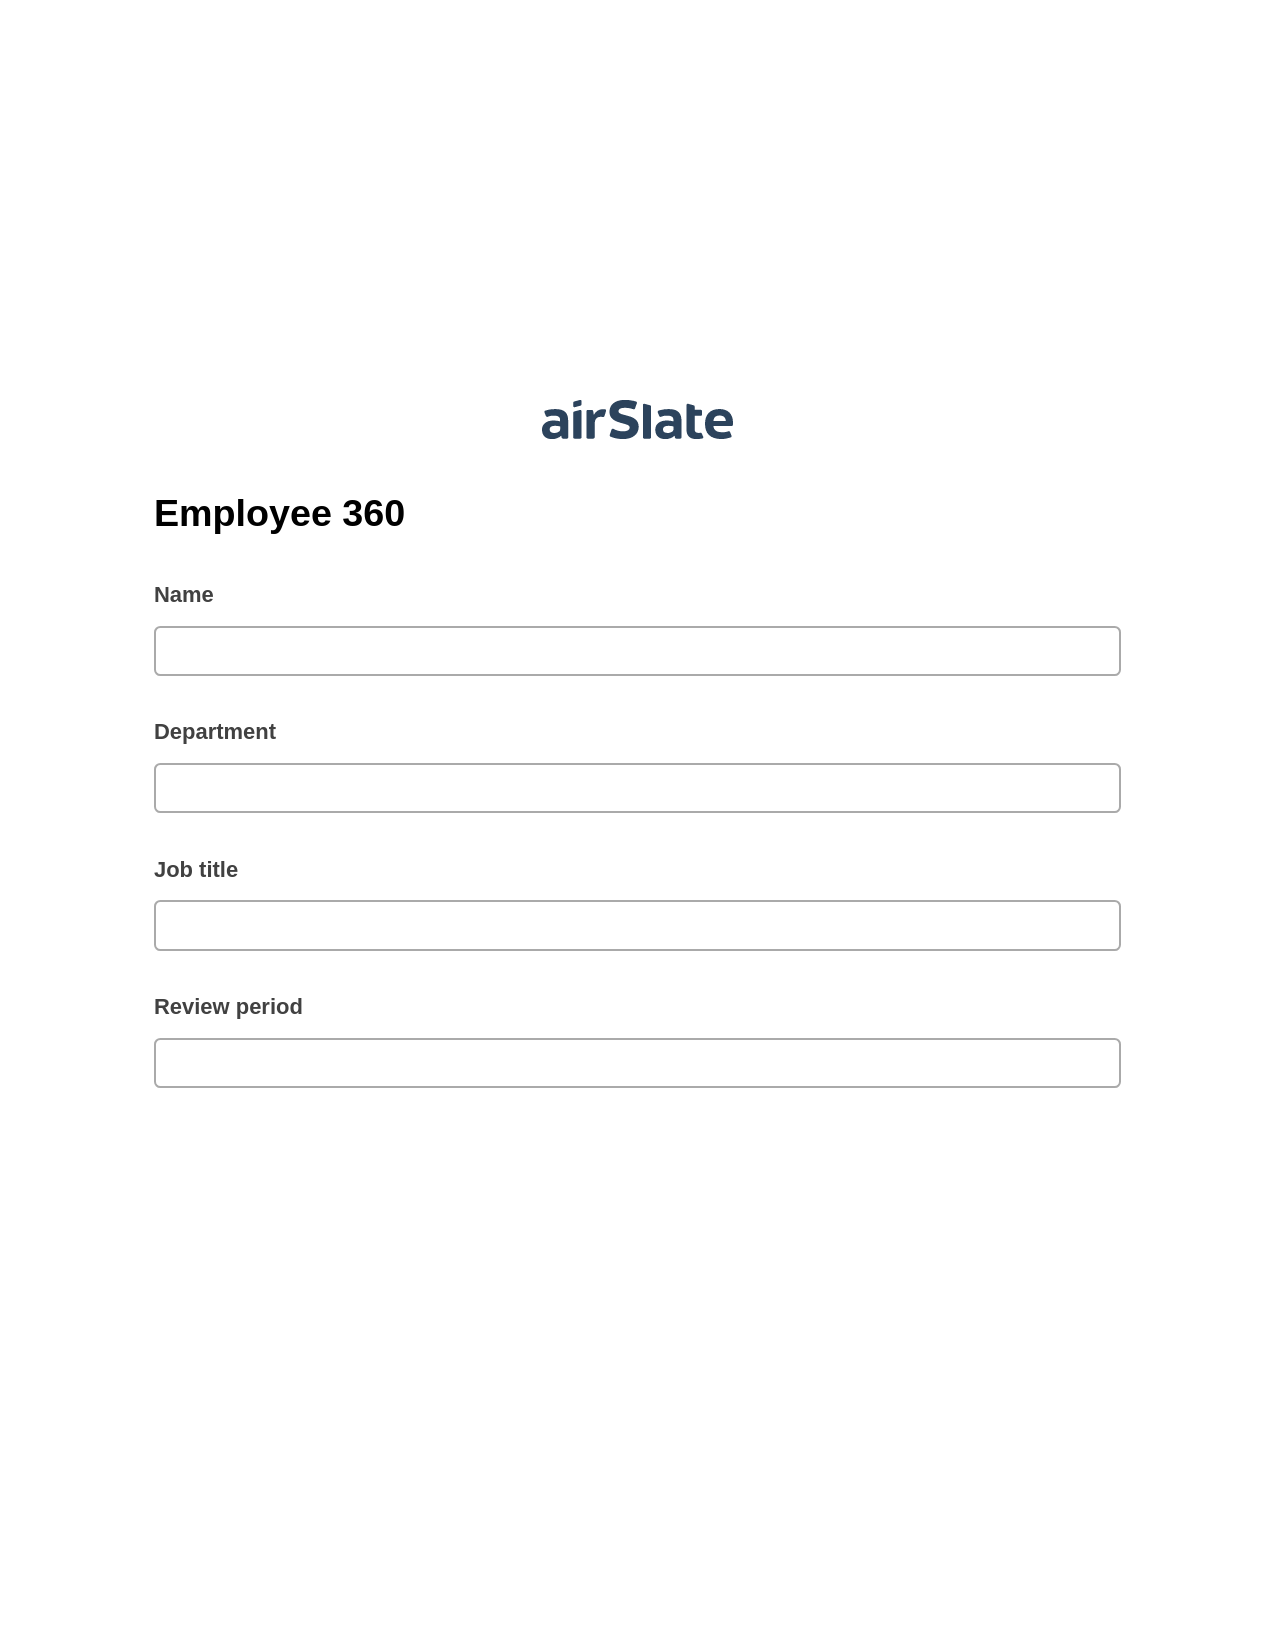 Multirole Employee 360 Pre-fill from Salesforce Records with SOQL Bot, Unassign Role Bot, Archive to Dropbox Bot